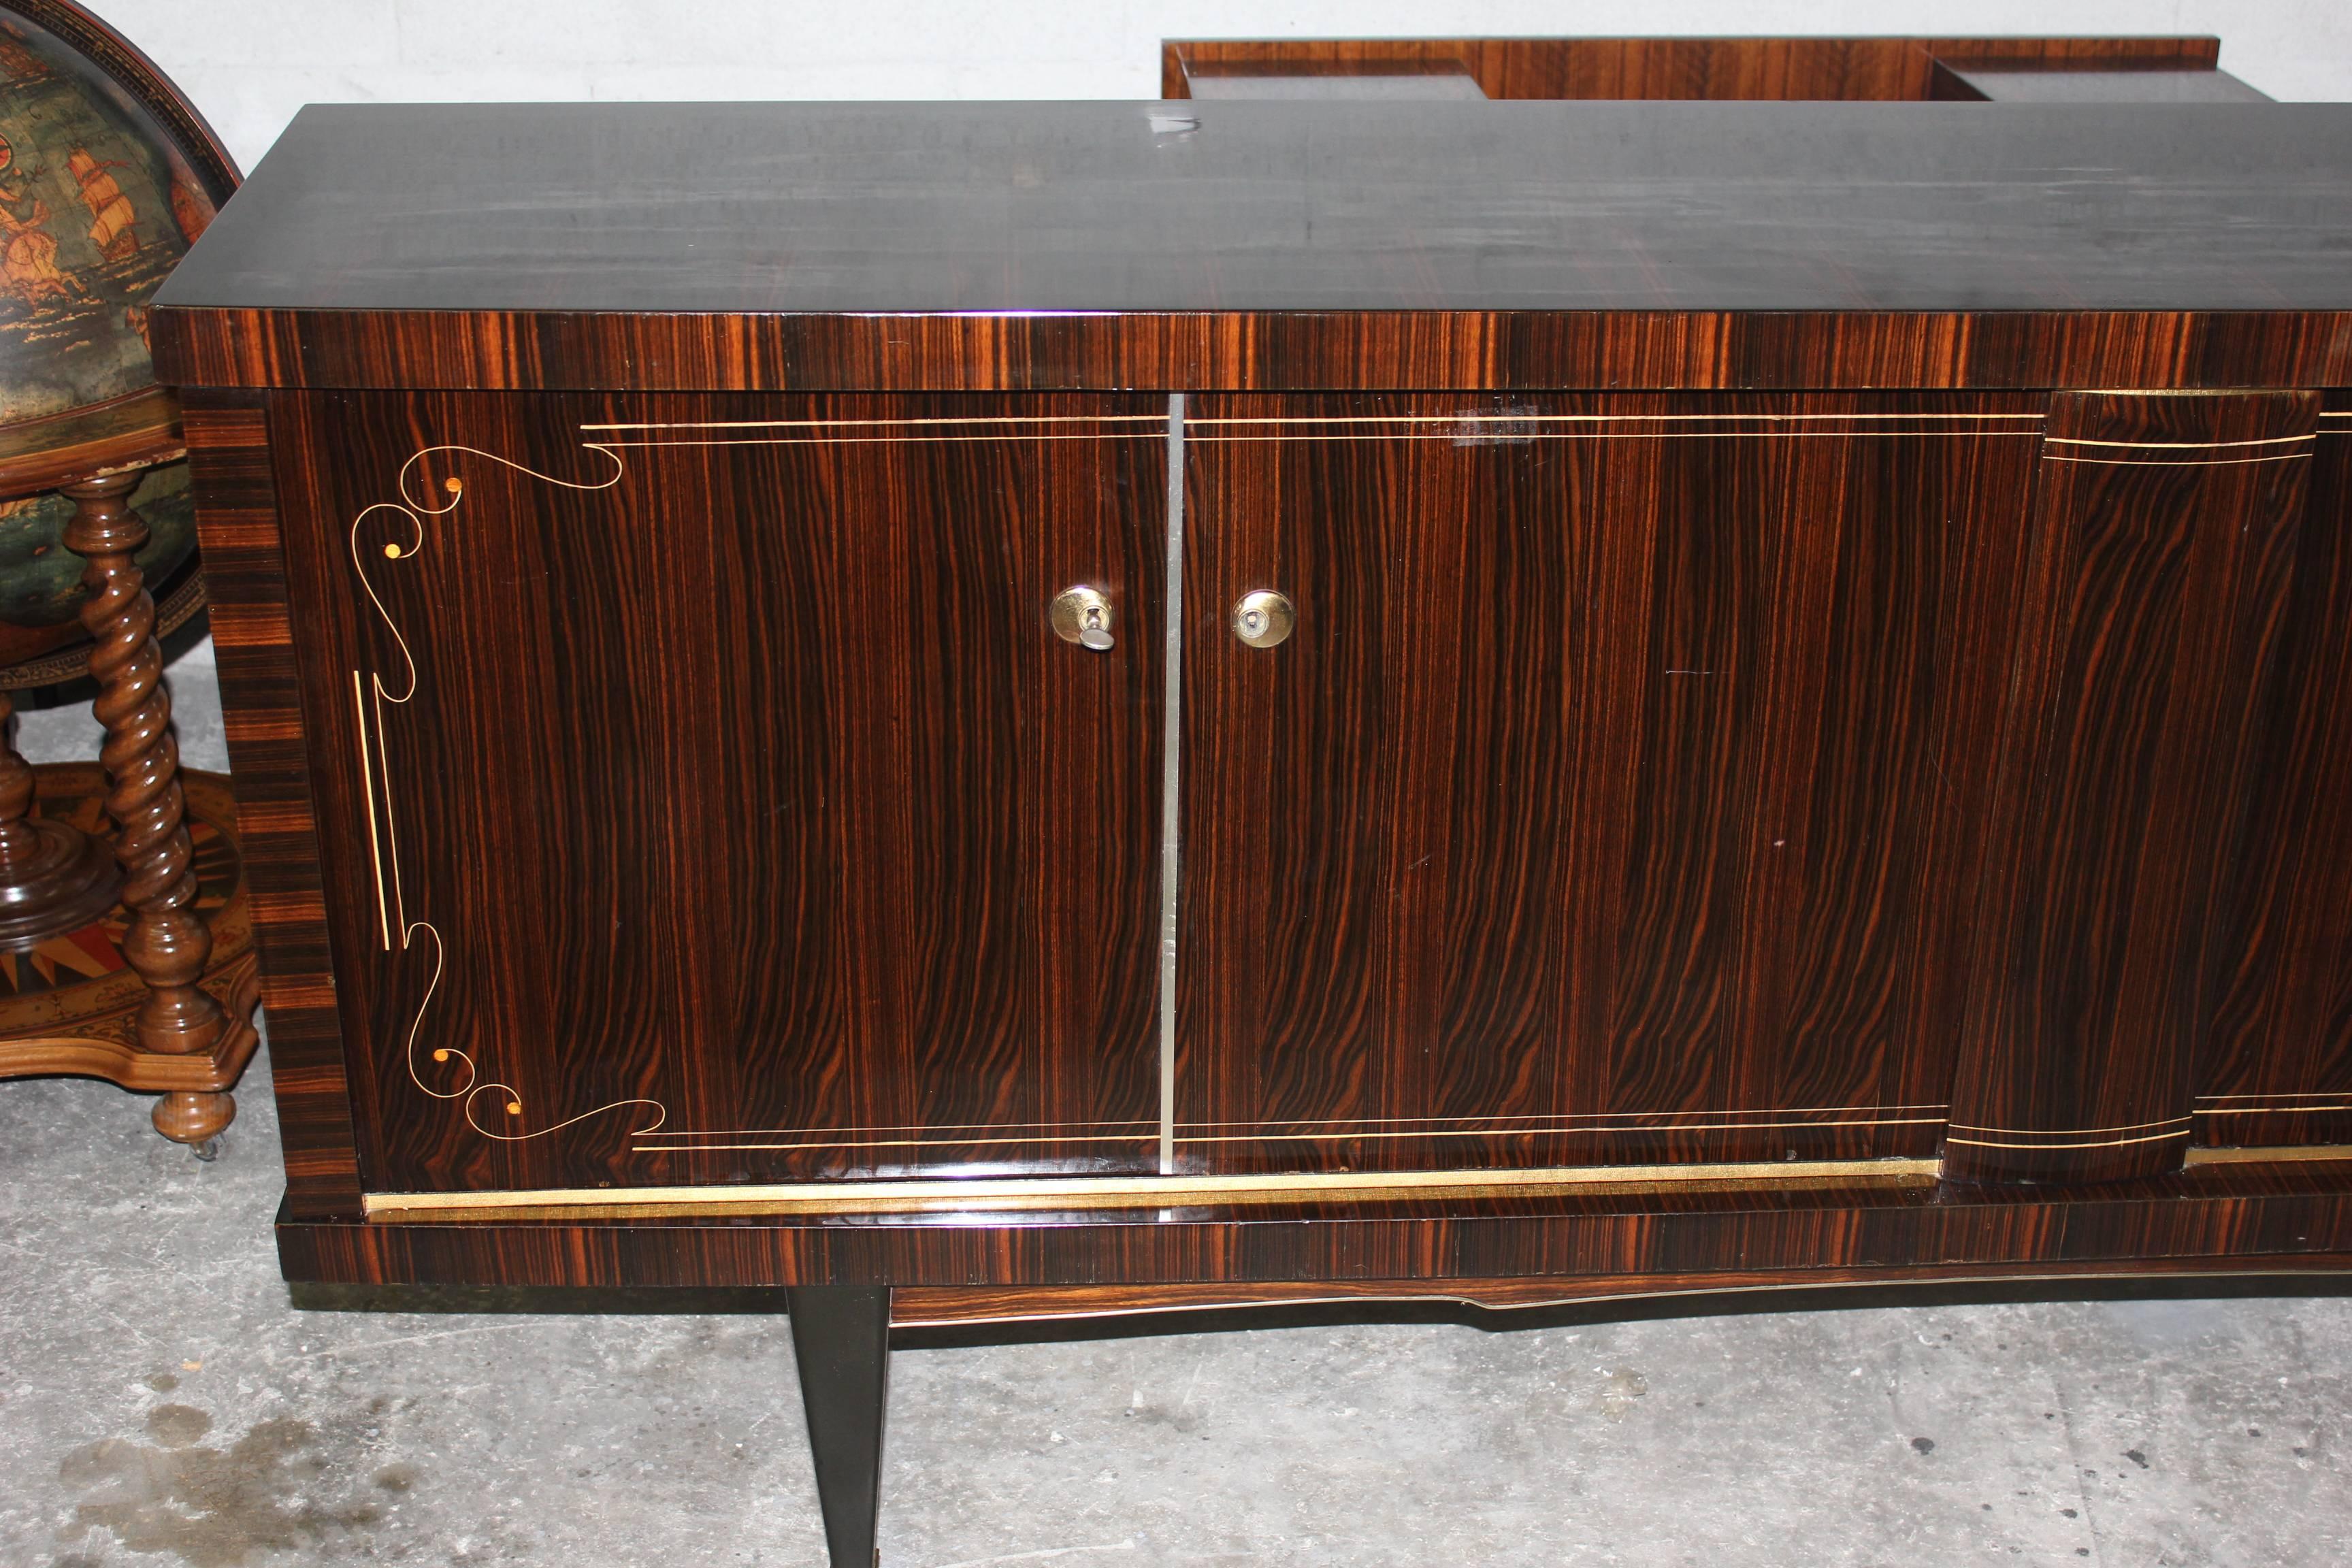 A French Art Deco exotic Macassar ebony buffet or credenza, circa 1940s. Interior finished in lemonwood.